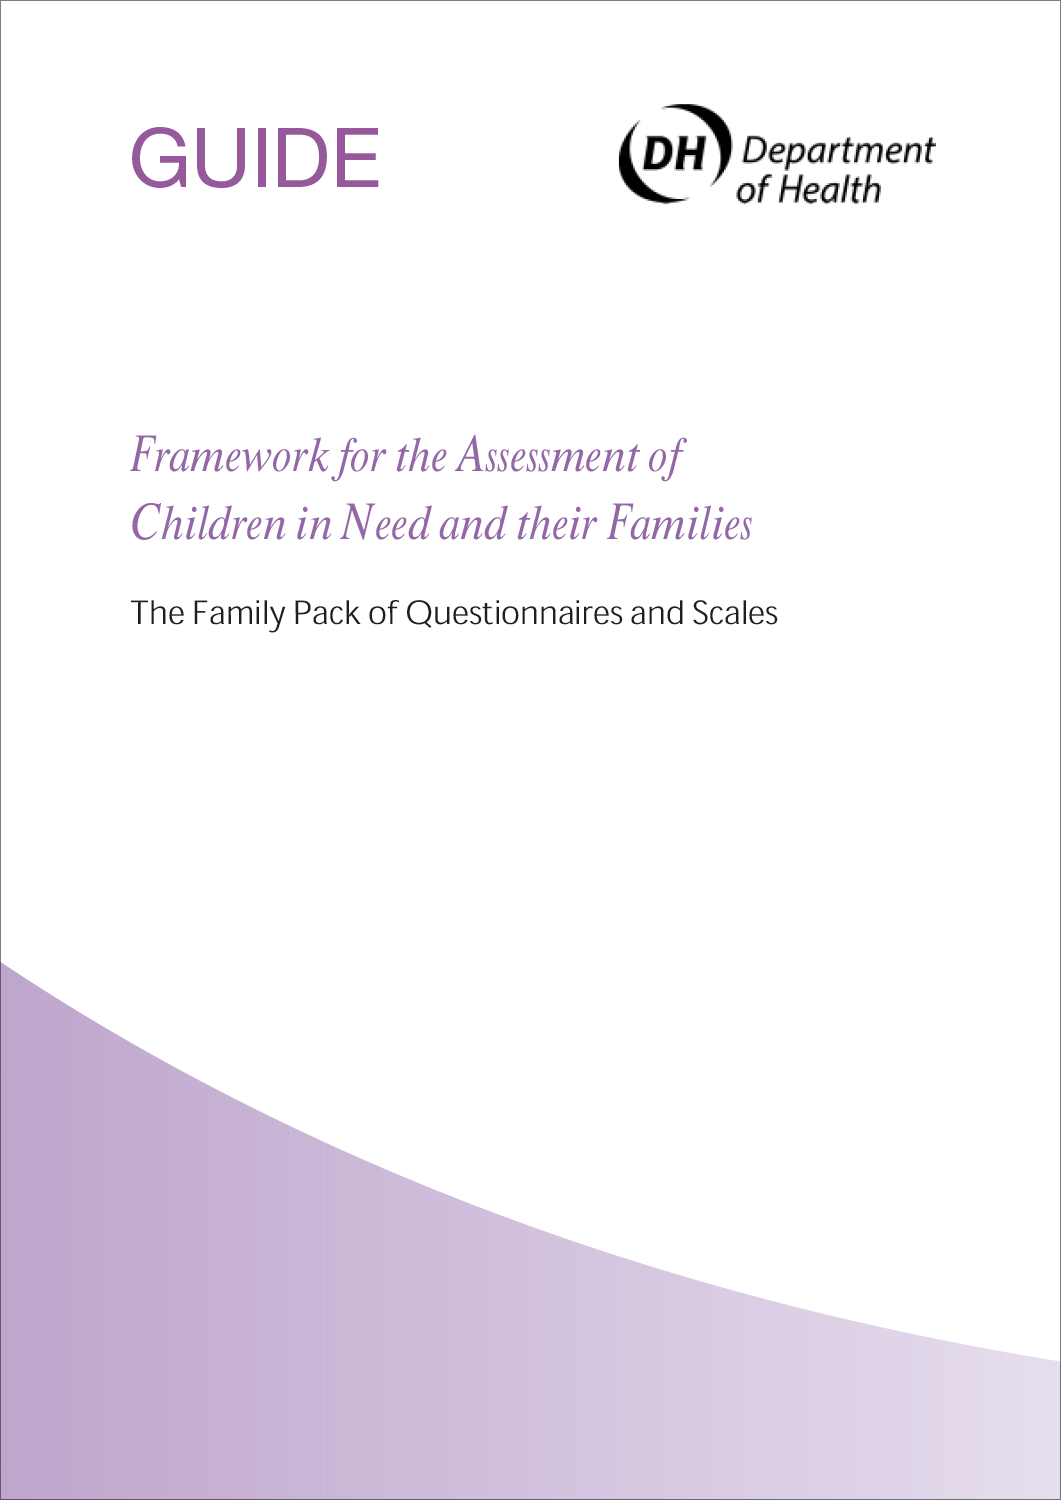 The Family Pack of Questionnaires and Scales